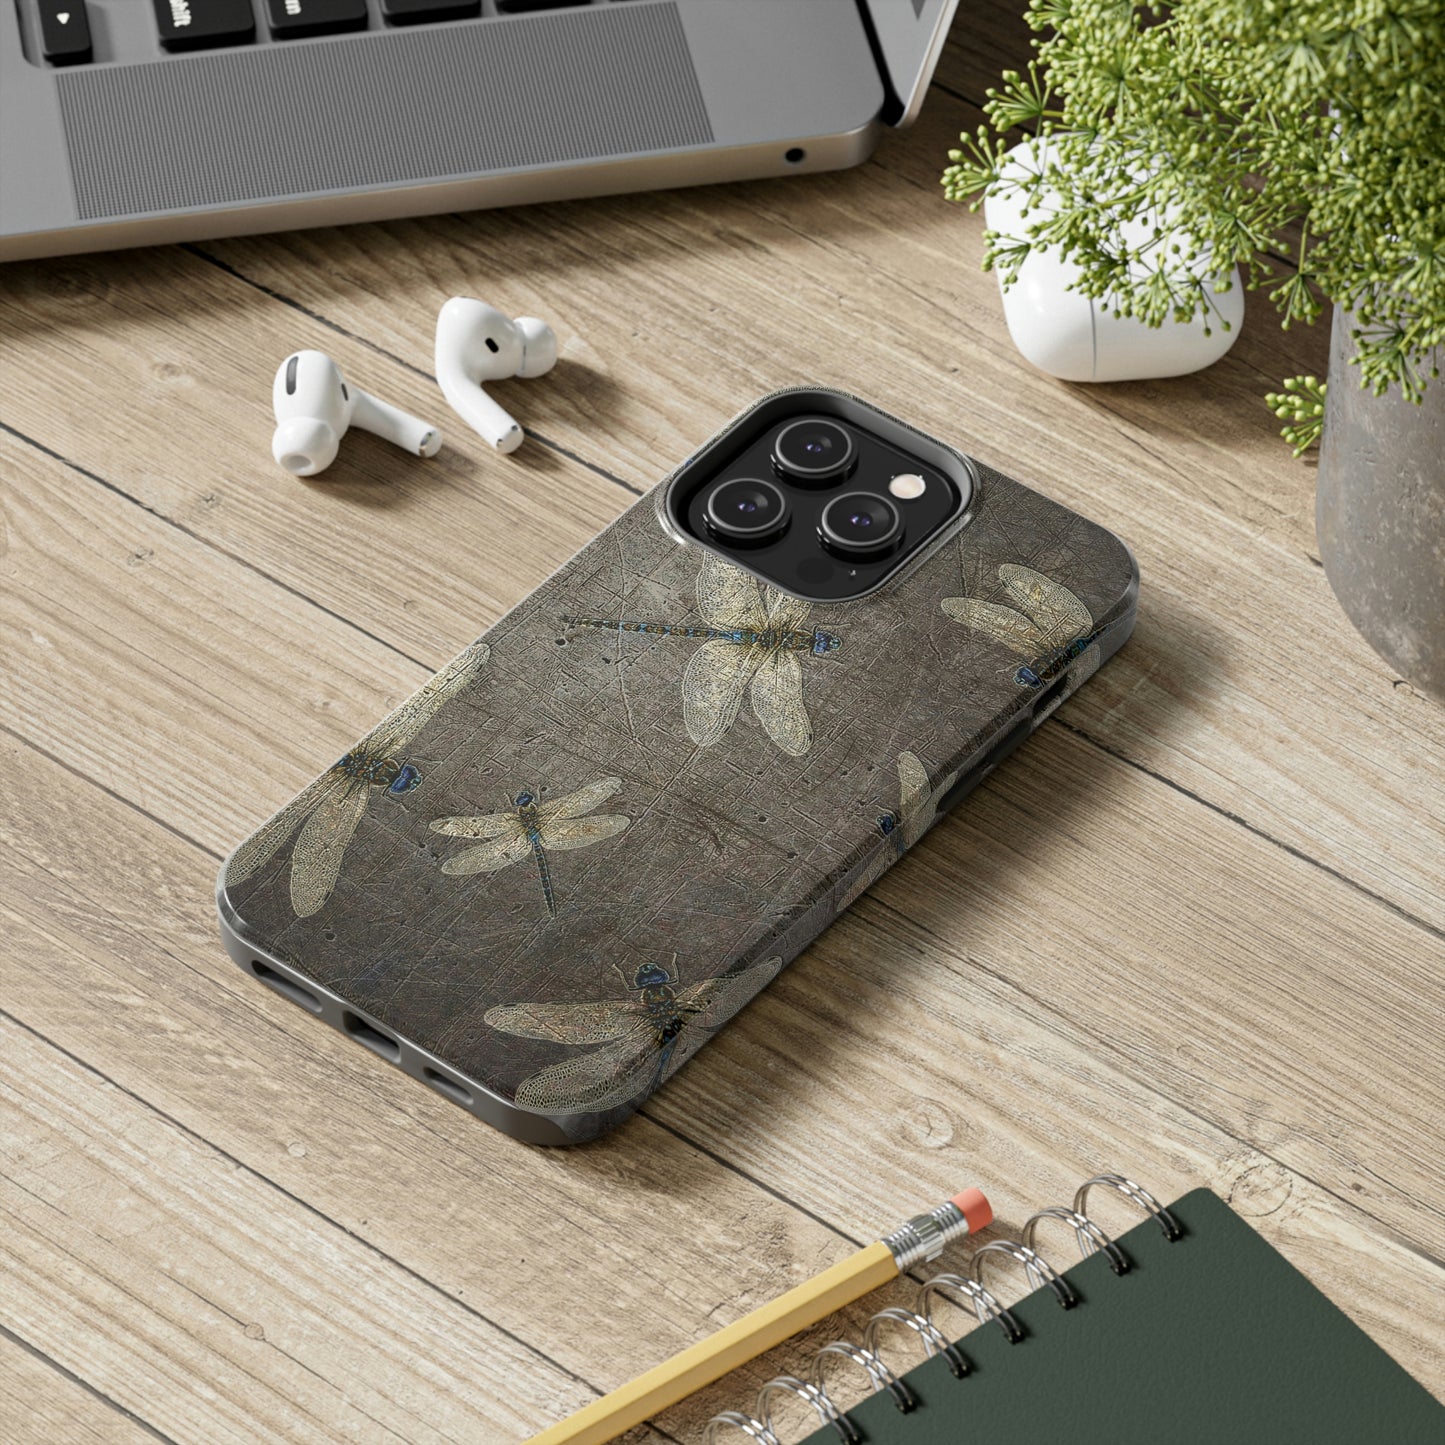 Dragonflies Print Tough Case for iPhone 14- Flight of Dragonflies on Distressed Gray Stone Print.